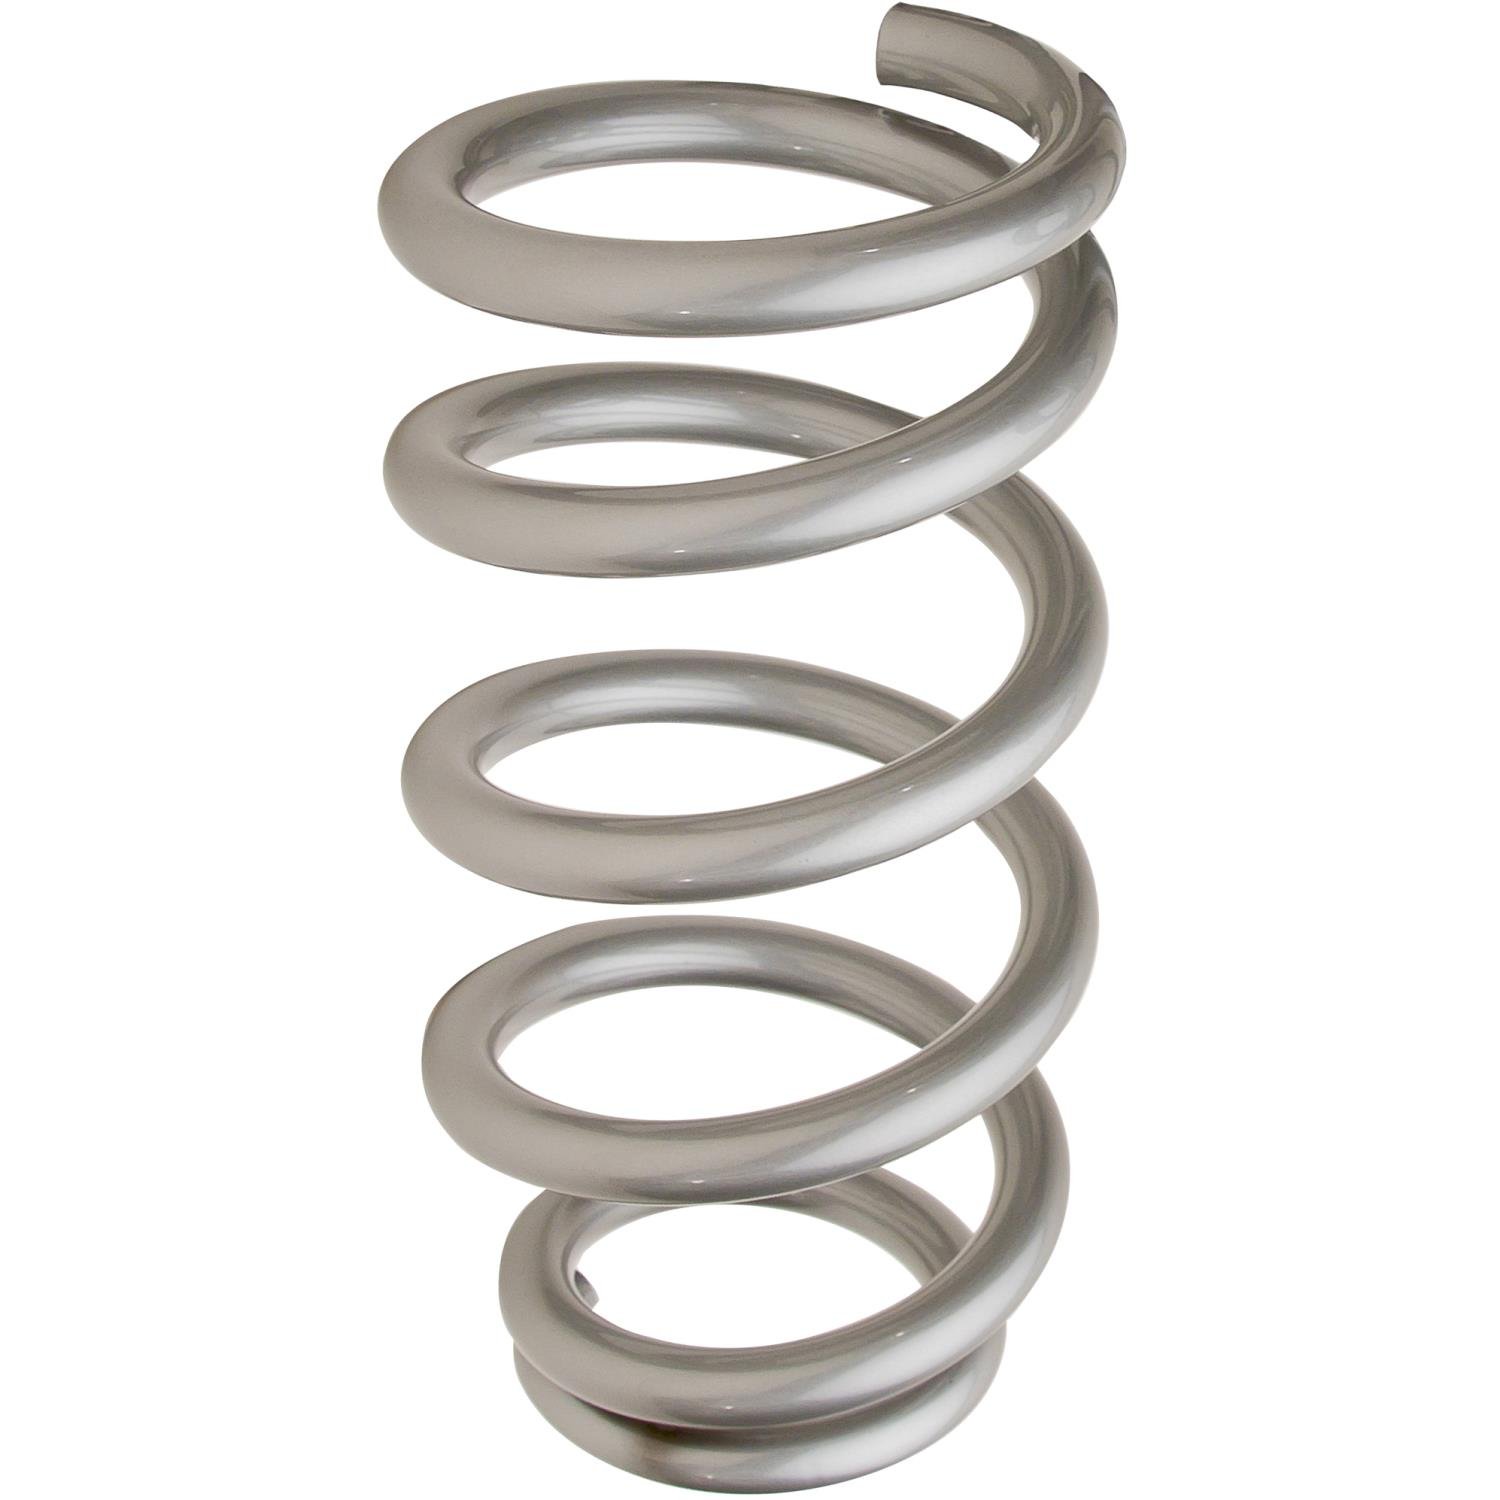 GM Style Pigtail High-Tensile Spring 10